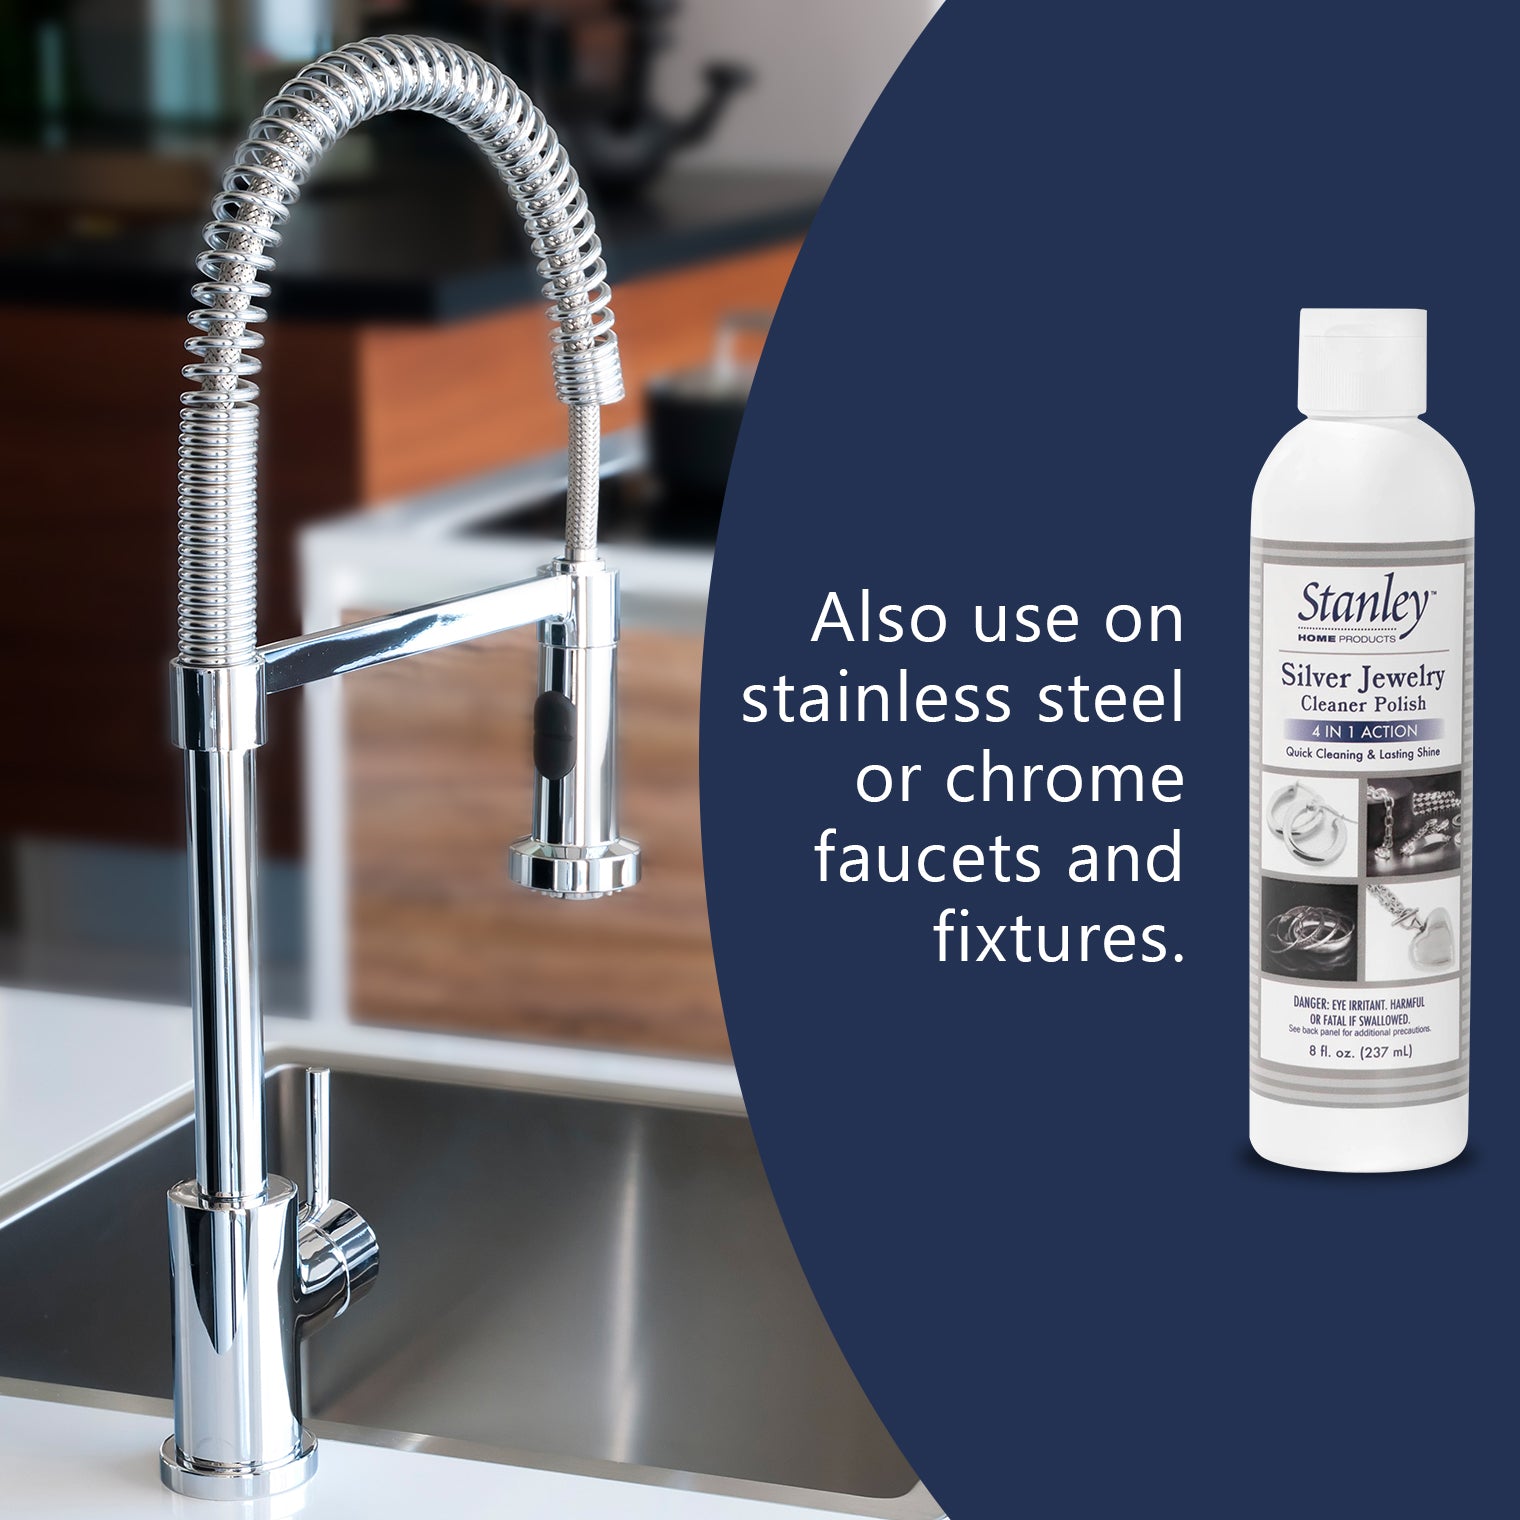 STANLEY HOME PRODUCTS Silver Jewelry Cleaner Polish - 4-in-1 Formula Cleans  and Protects Silver and Sterling Jewelry and More Helps Prevent Tarnish